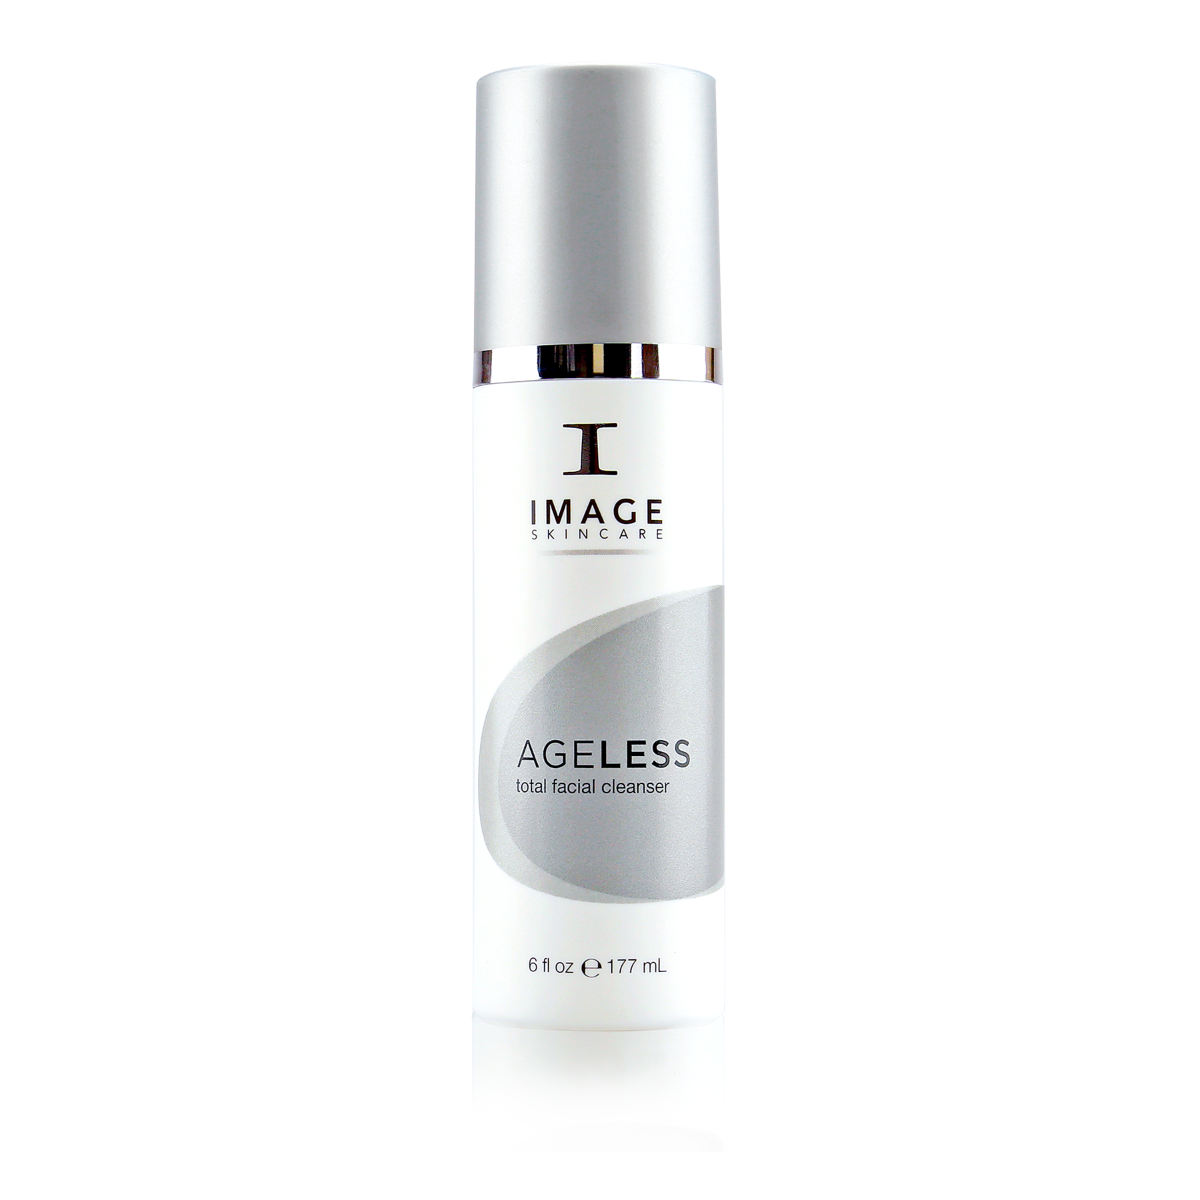 IMAGE AGELESS Total Facial Cleanser 177ml